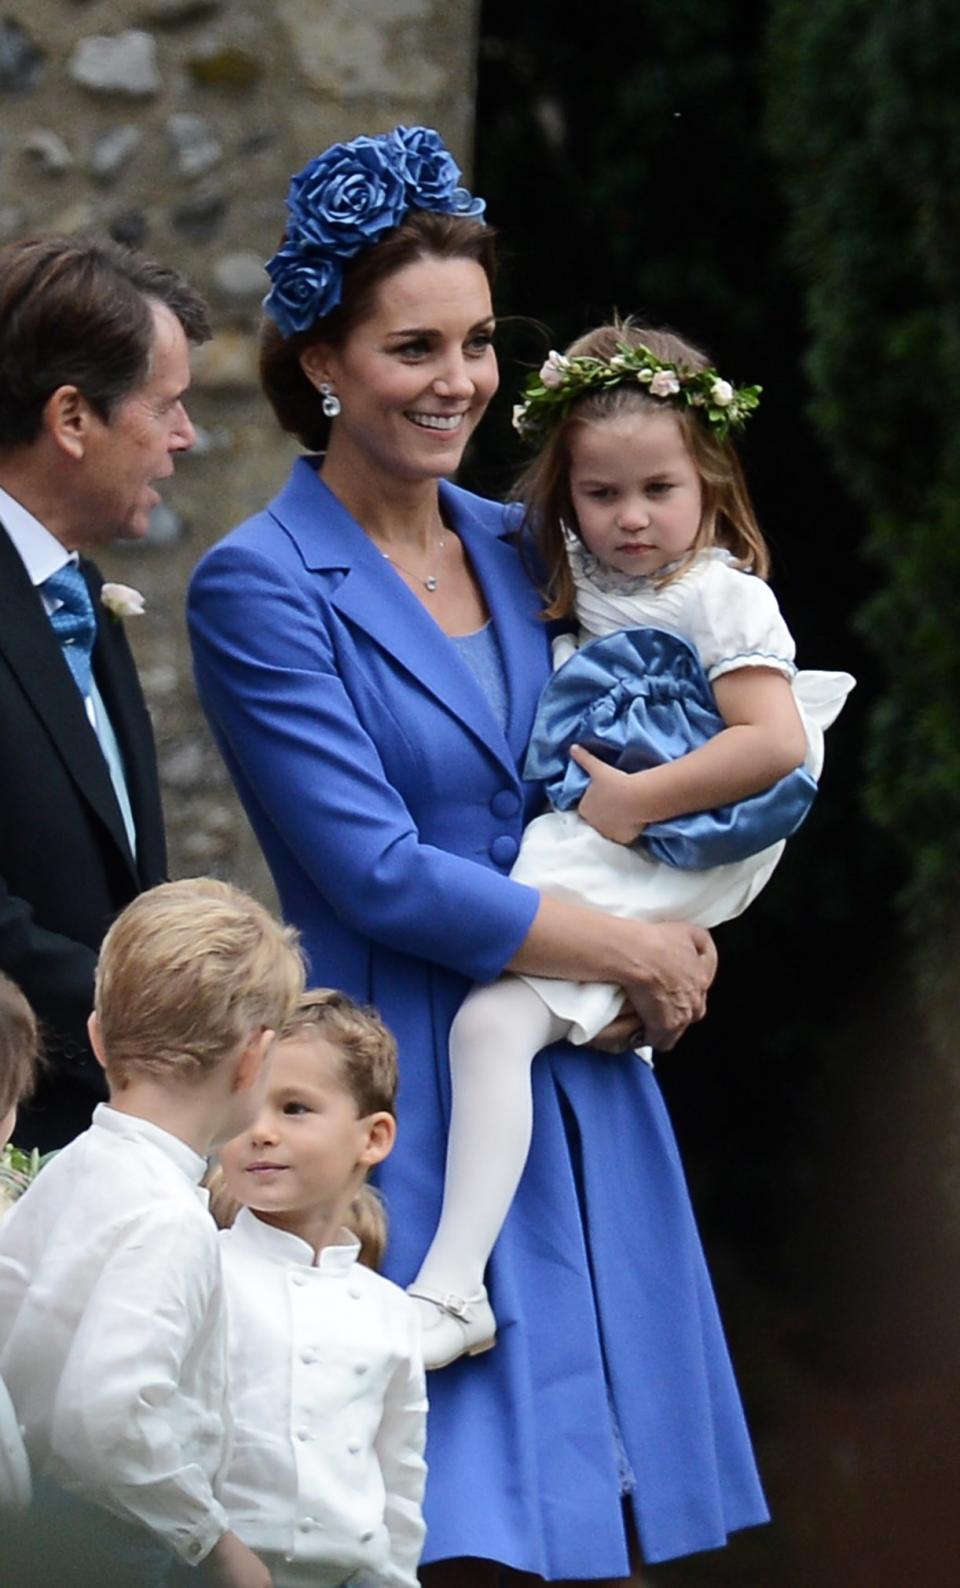 Kate Middleton recycled a rich blue dress for the wedding of a family friend, Sophie Carter, over the weekend.